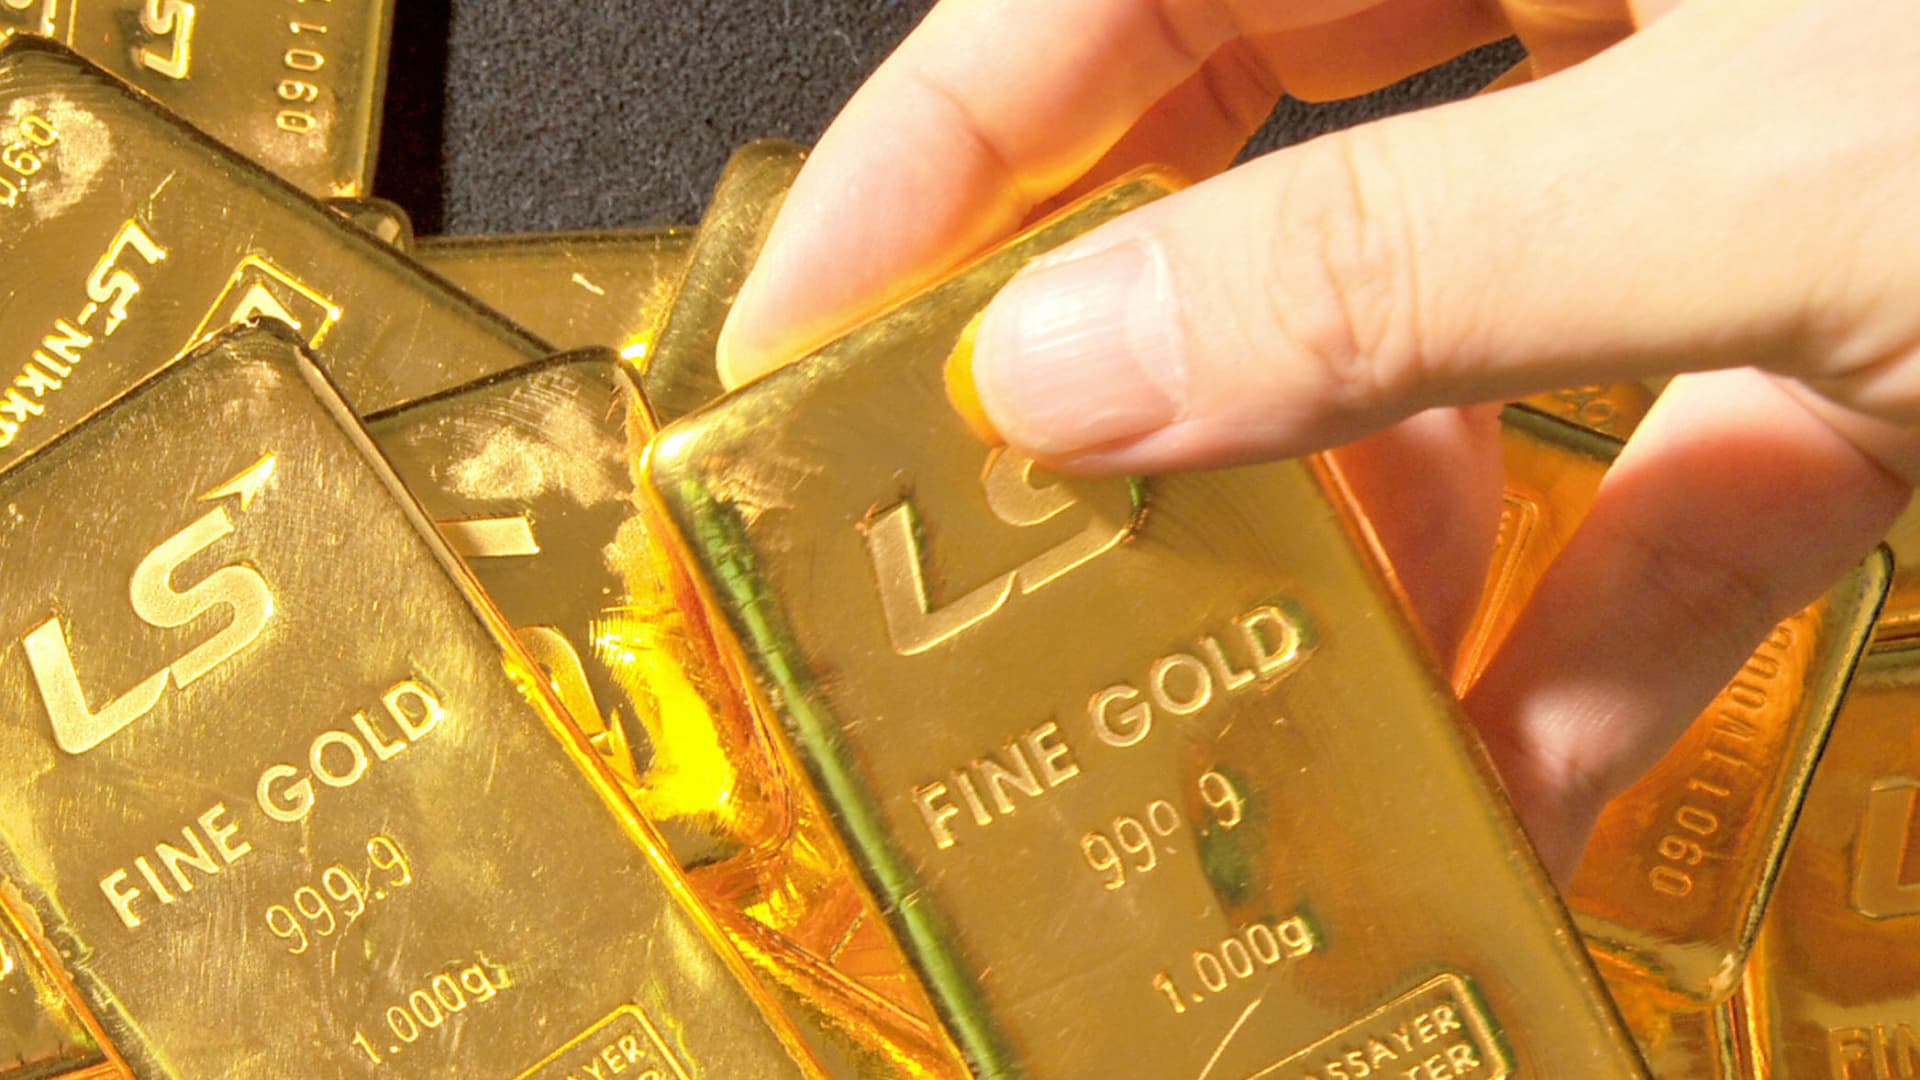 Gold languishes near 3-week low after Fed tapers as expected